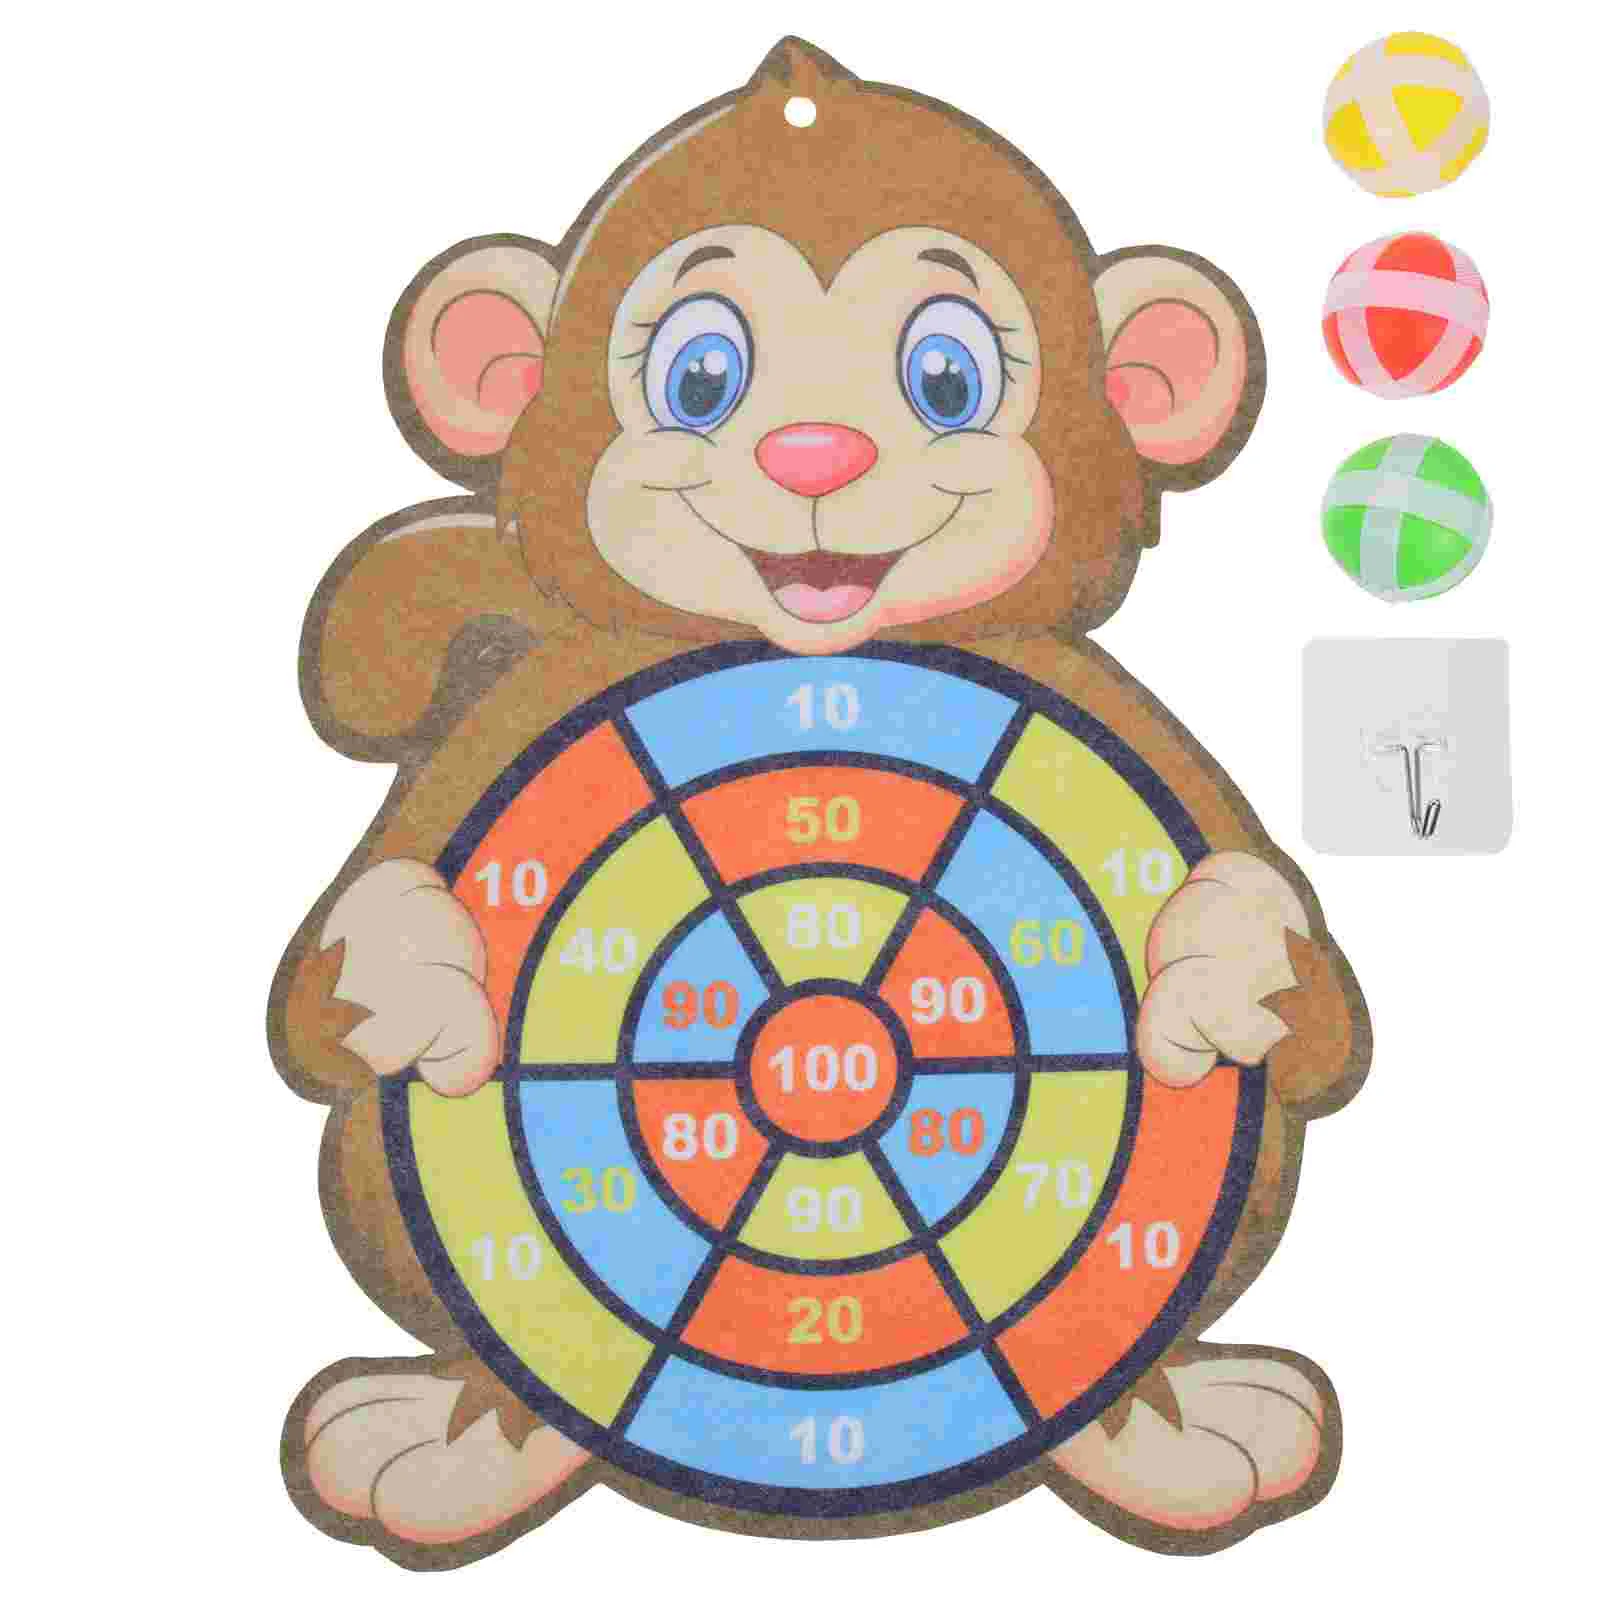 

Boys Suit Children's Sticky Ball Indoor Games Kids Throwing Toys Dart Board Age 8-10 Years Old Plastic Gifts